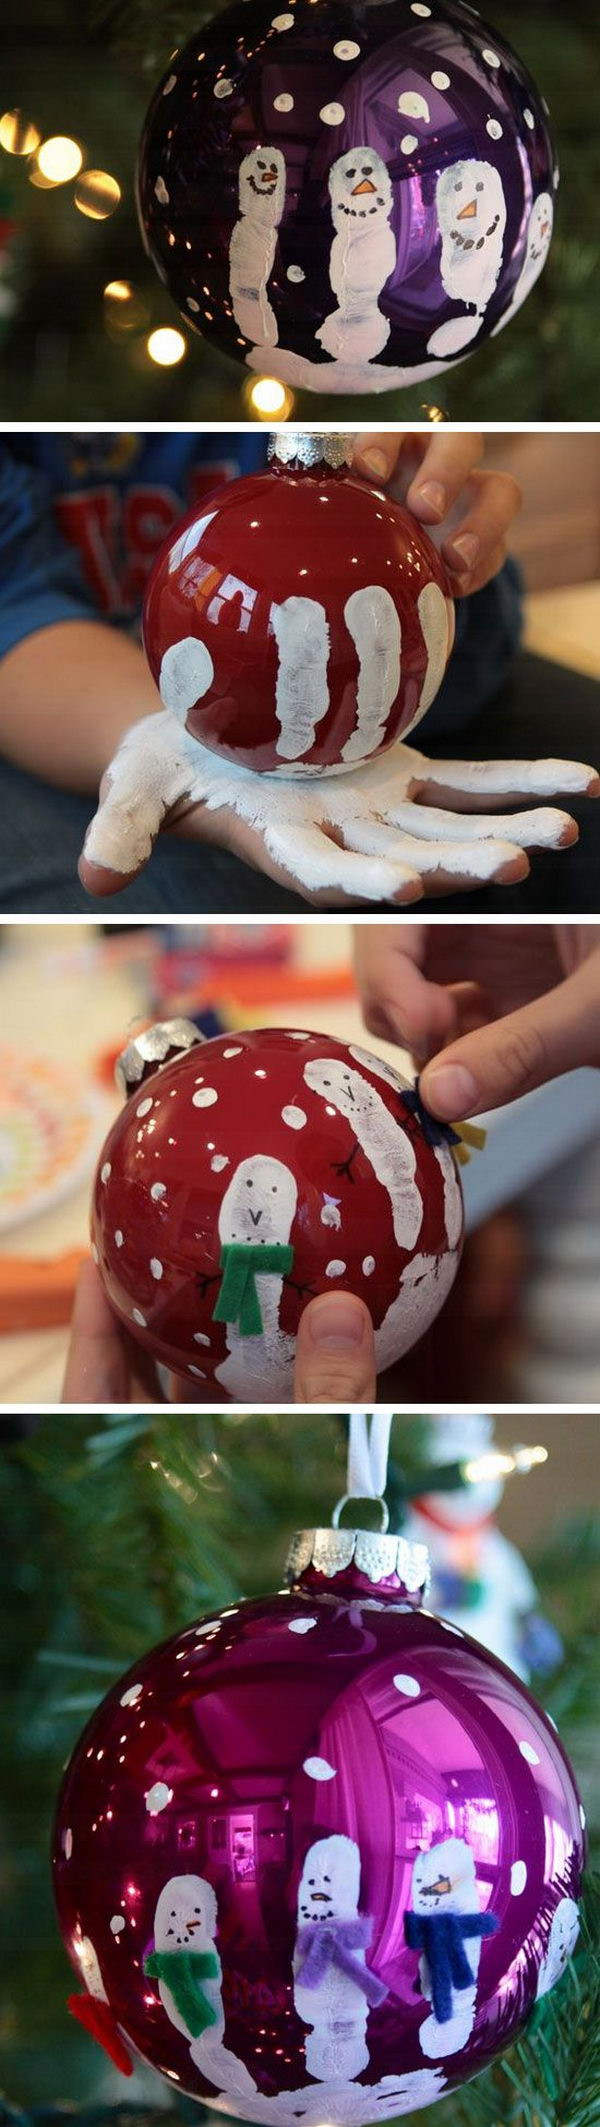 DIY Party Decorations For Kids
 Easy & Creative Christmas DIY Projects That Kids Can Do